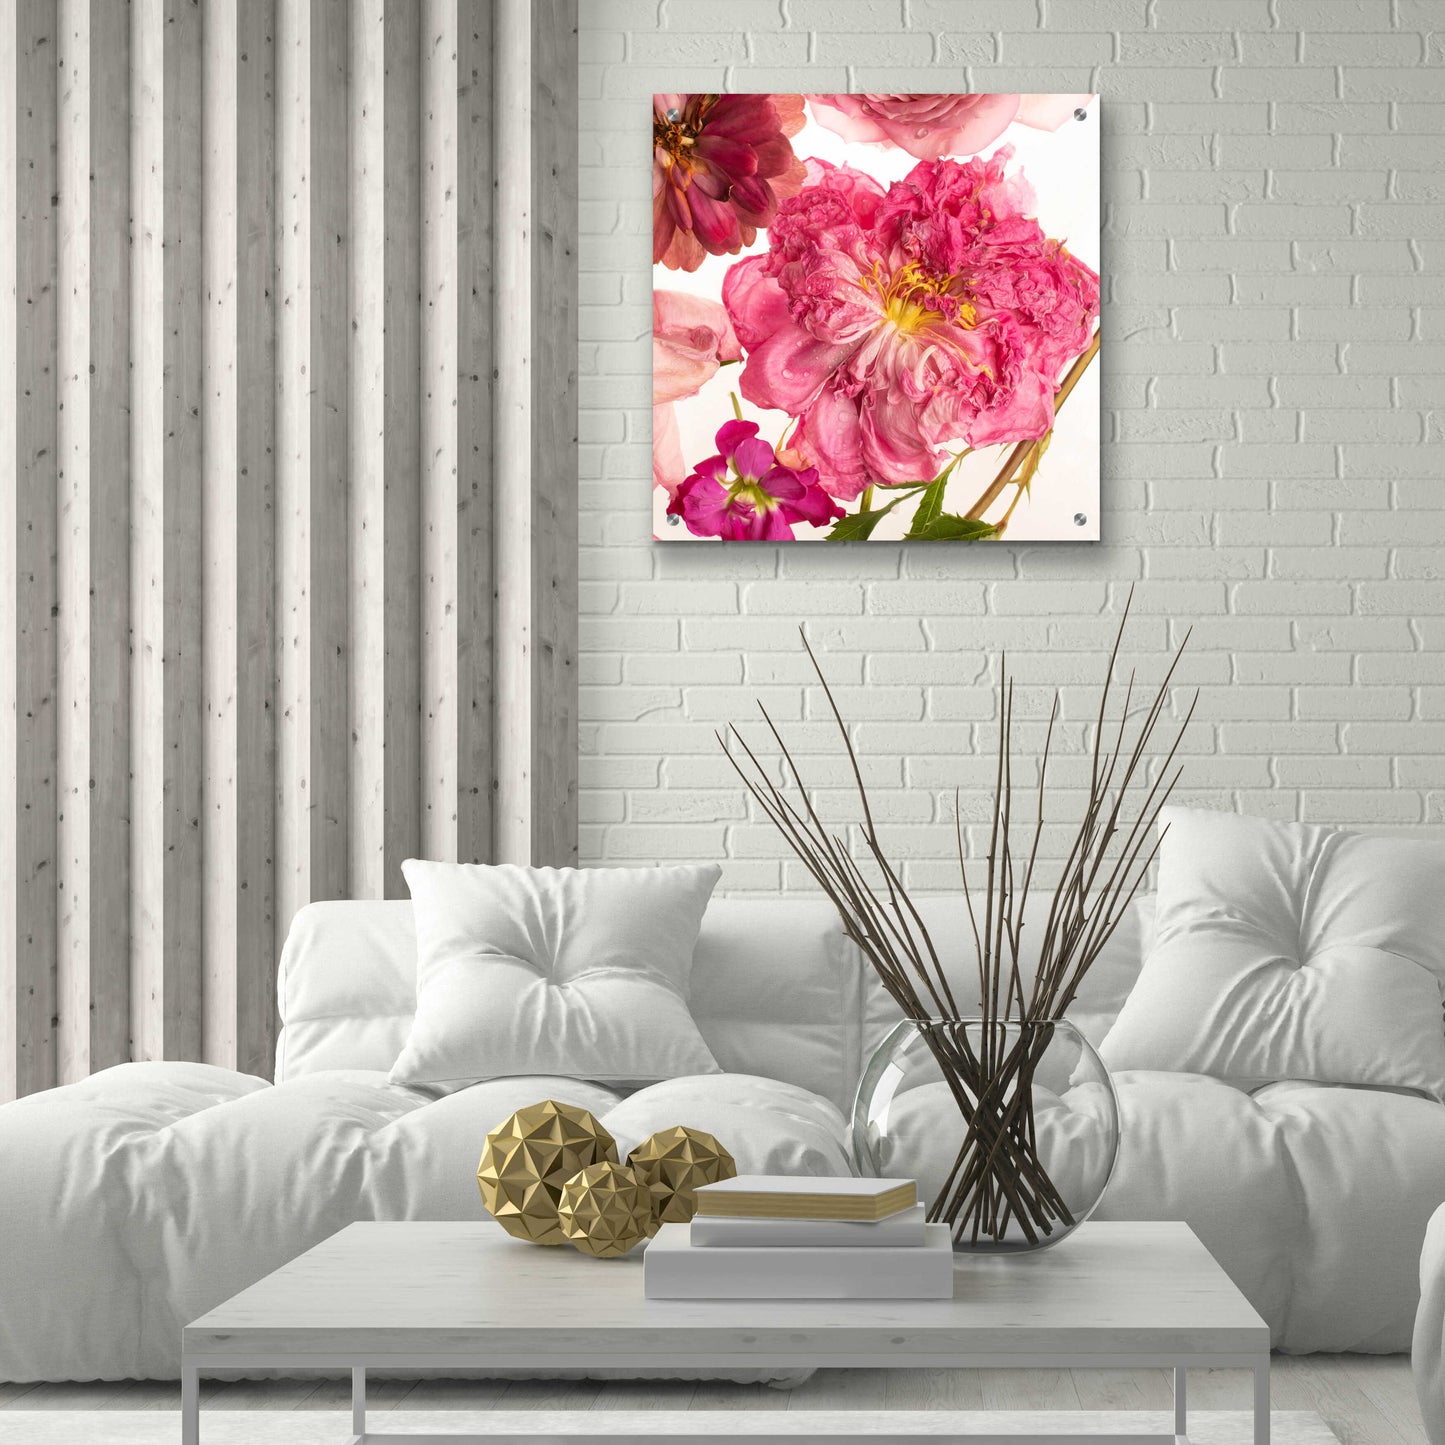 Epic Art 'Peony Dream on White' by Leah McLean, Acrylic Glass Wall Art,24x24